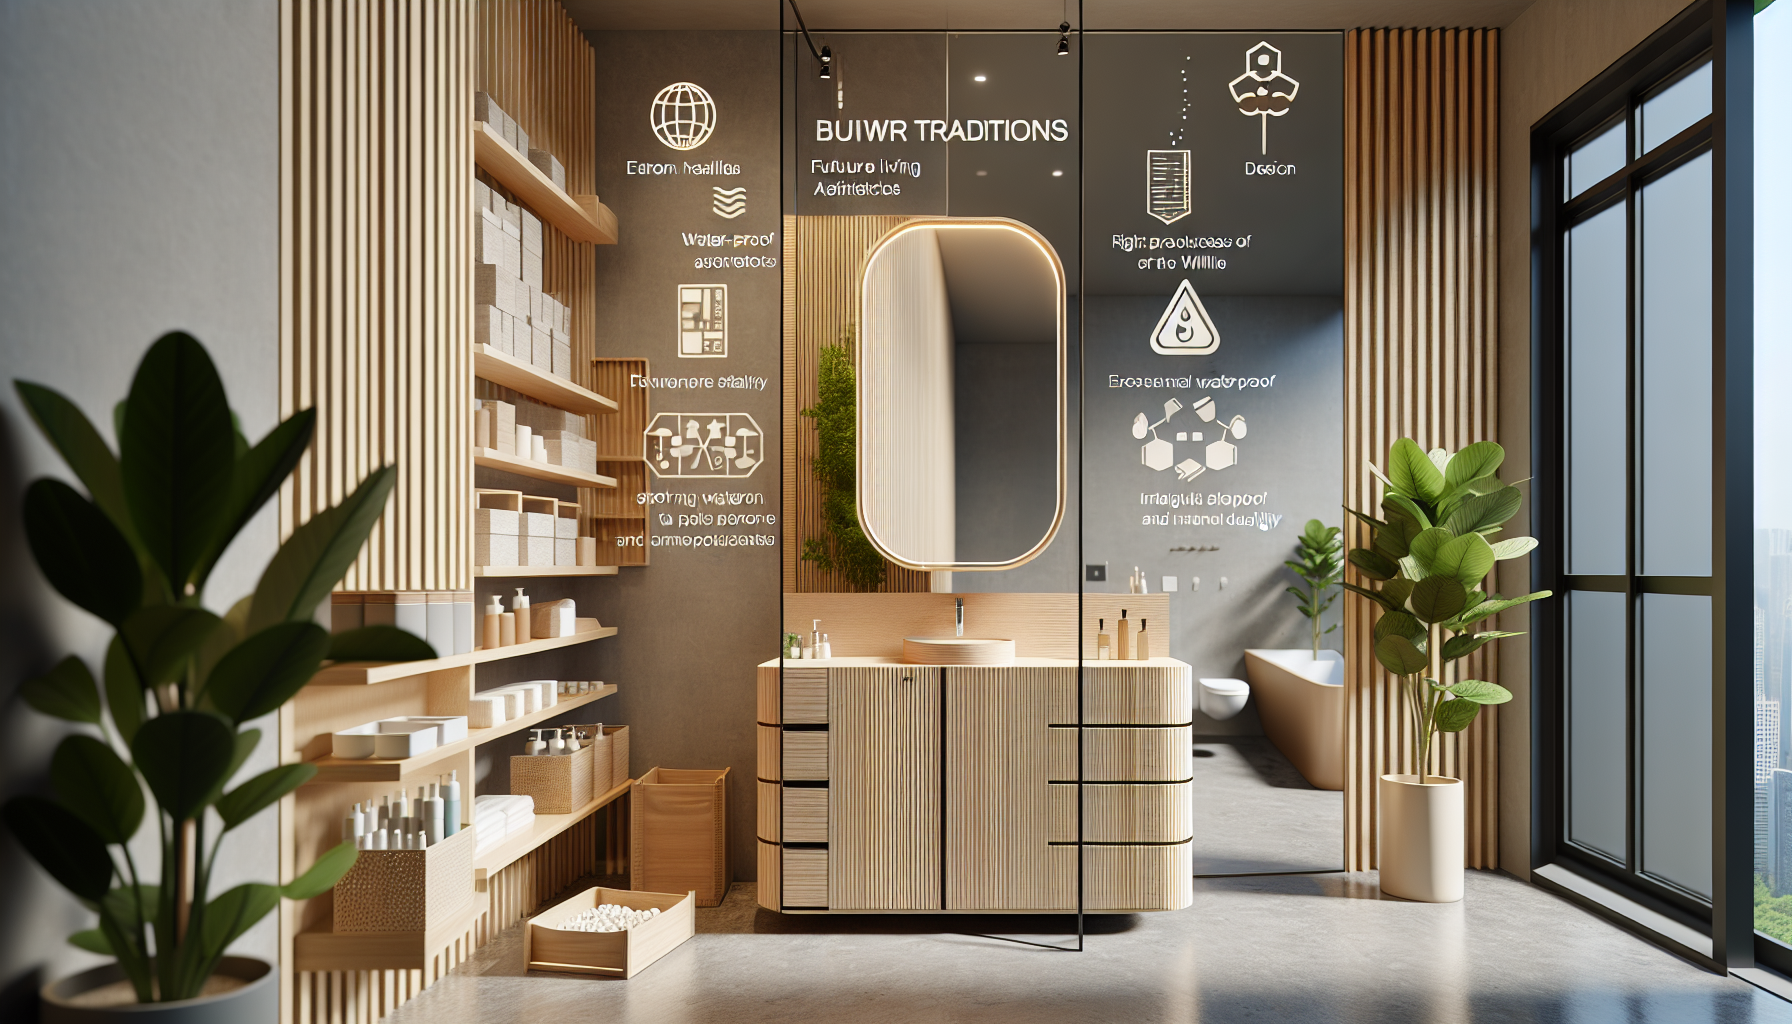 Future Living Aesthetics and Sustainability-Explore the Modern Design of Y-6608W Environmentally Friendly Bathroom Cabinet